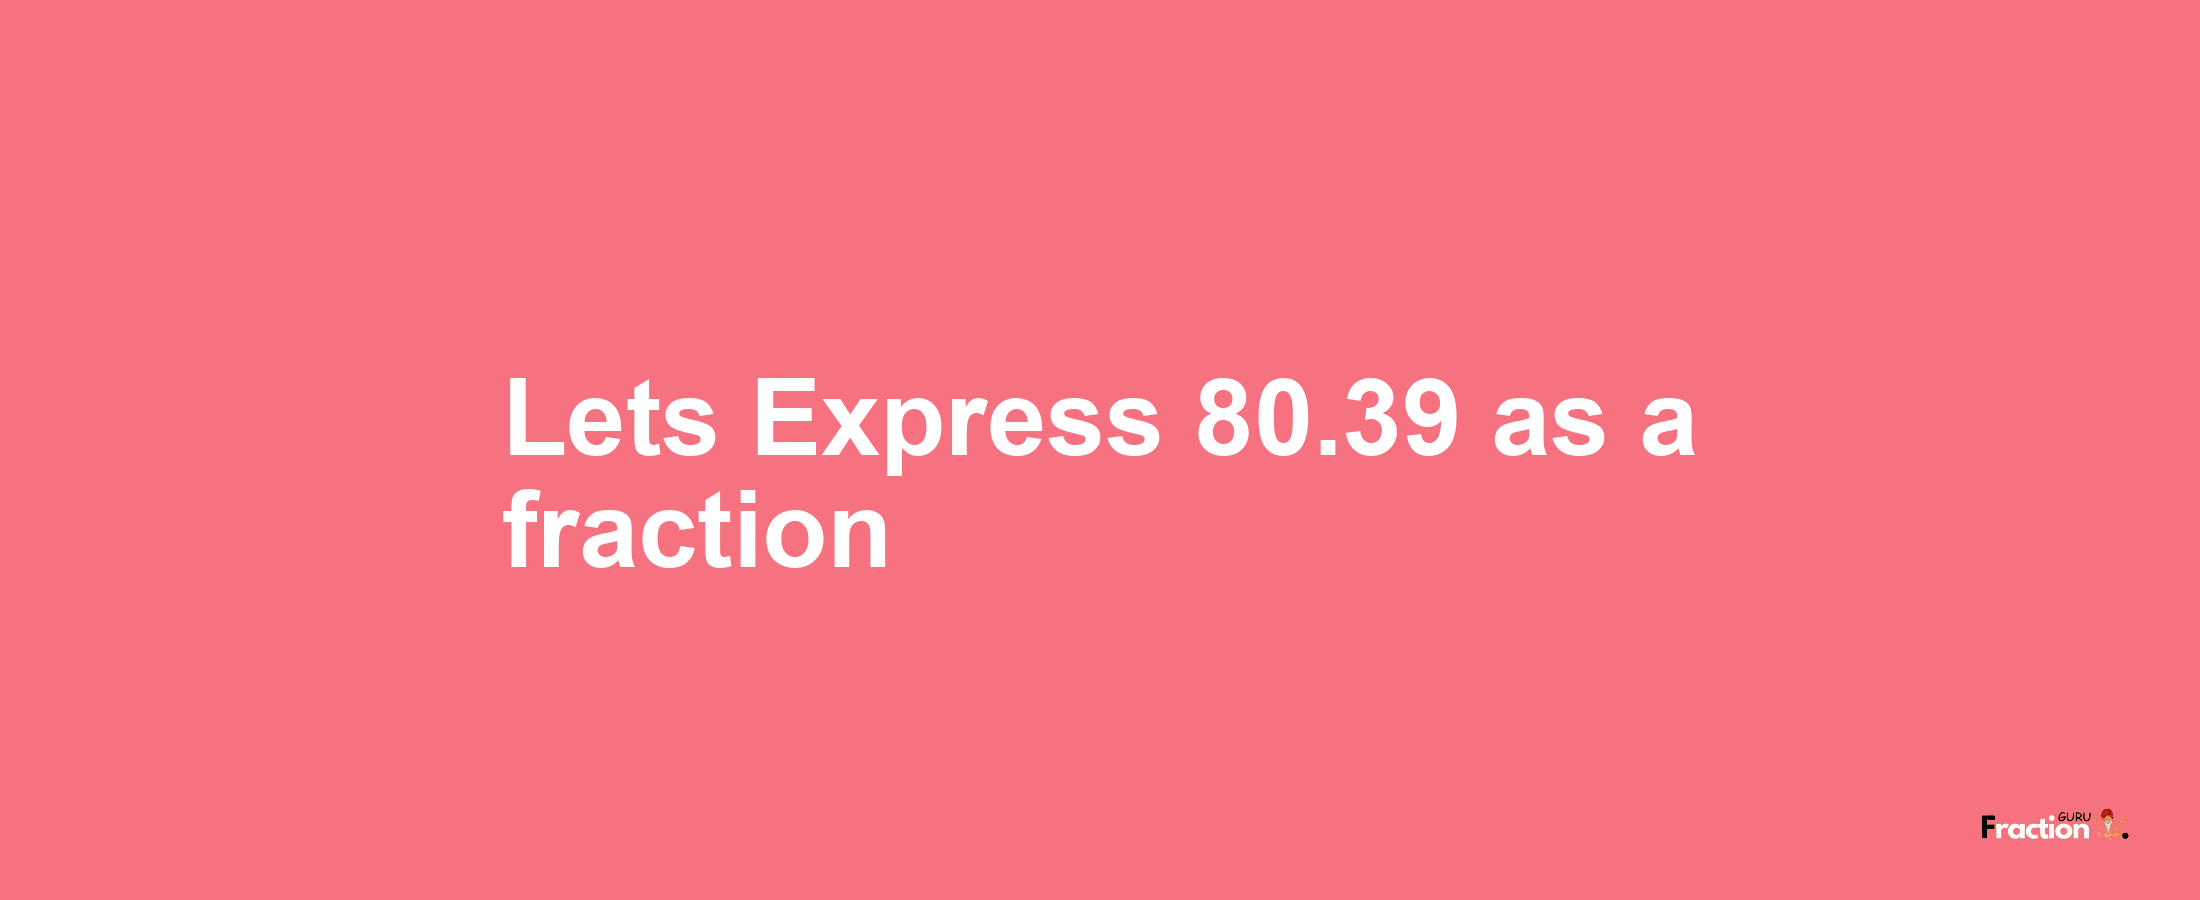 Lets Express 80.39 as afraction